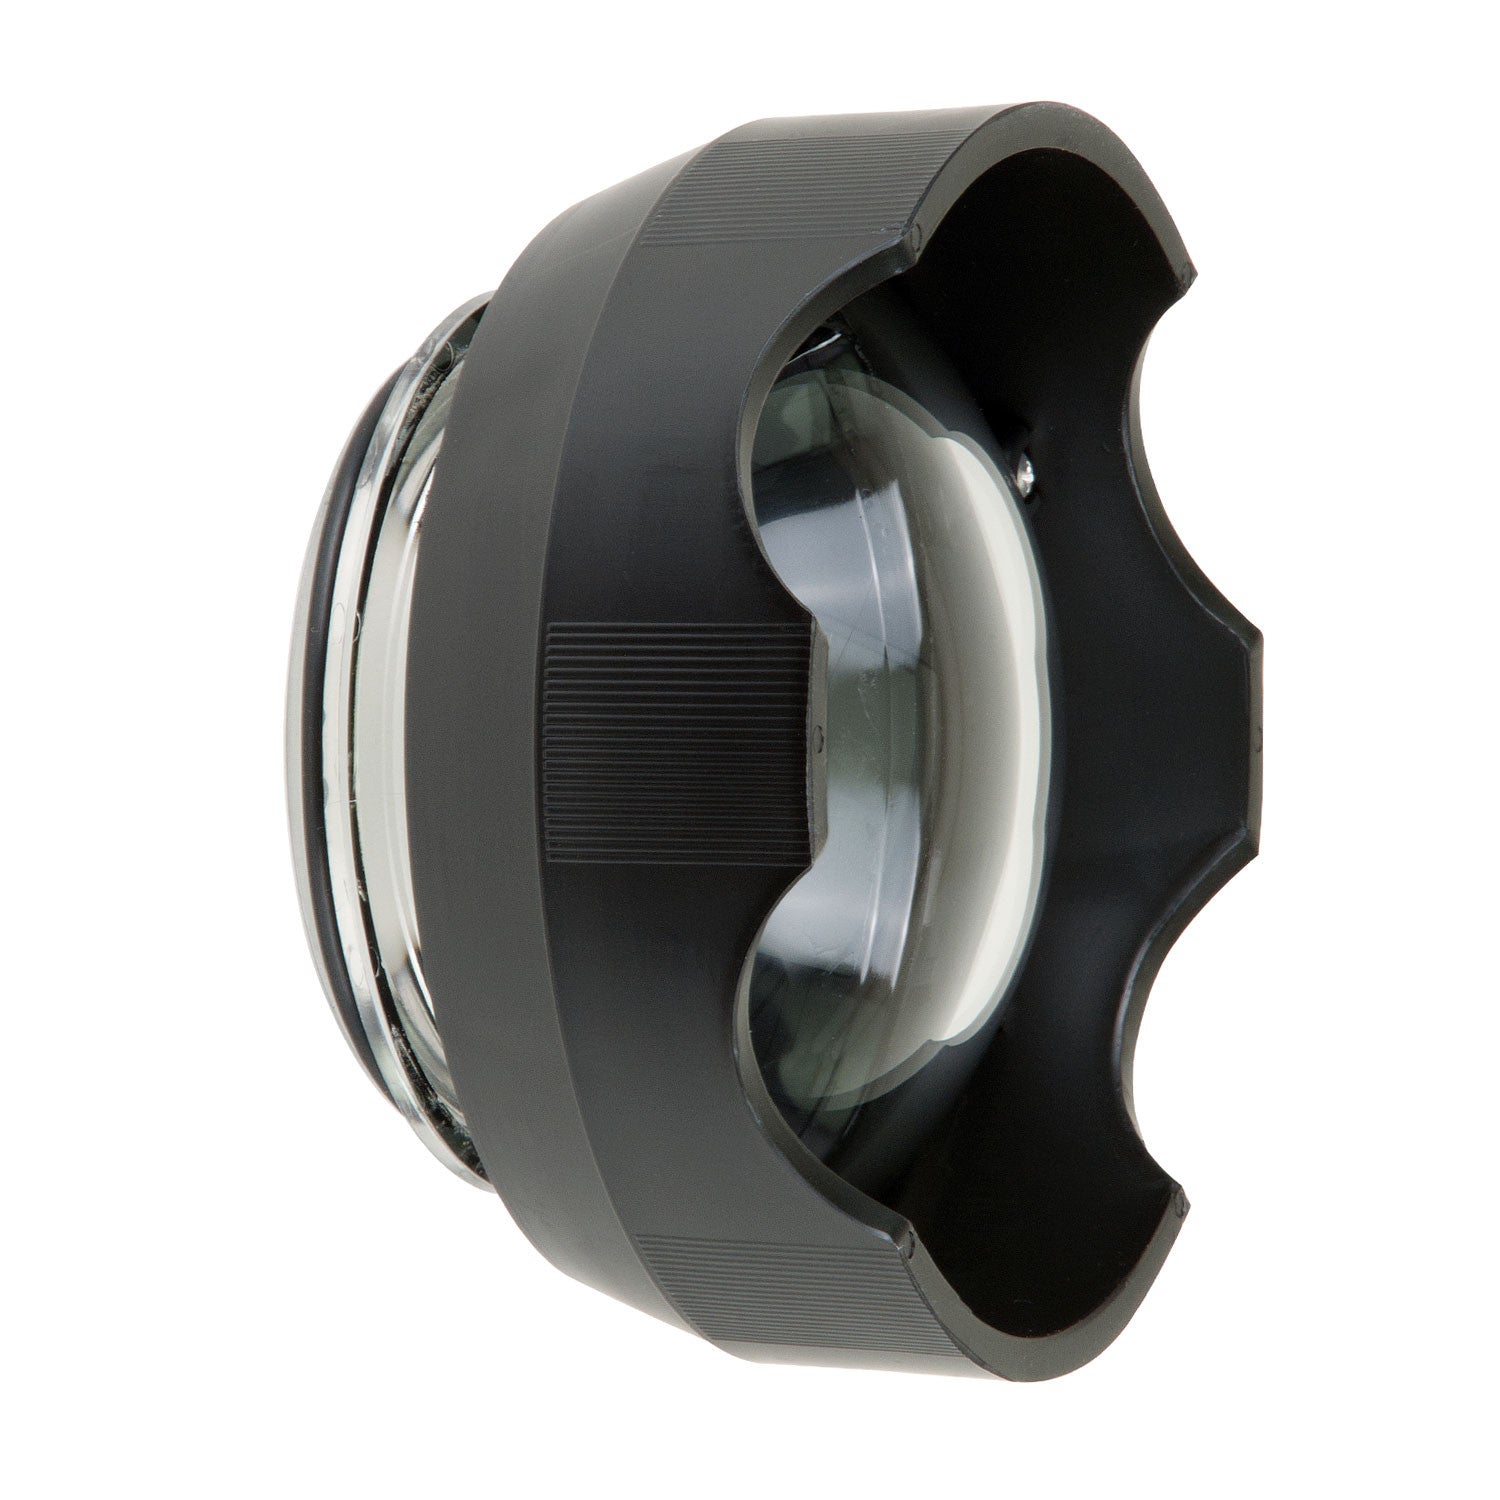 FL 6 inch Dome for Lenses Up To 3 Inches